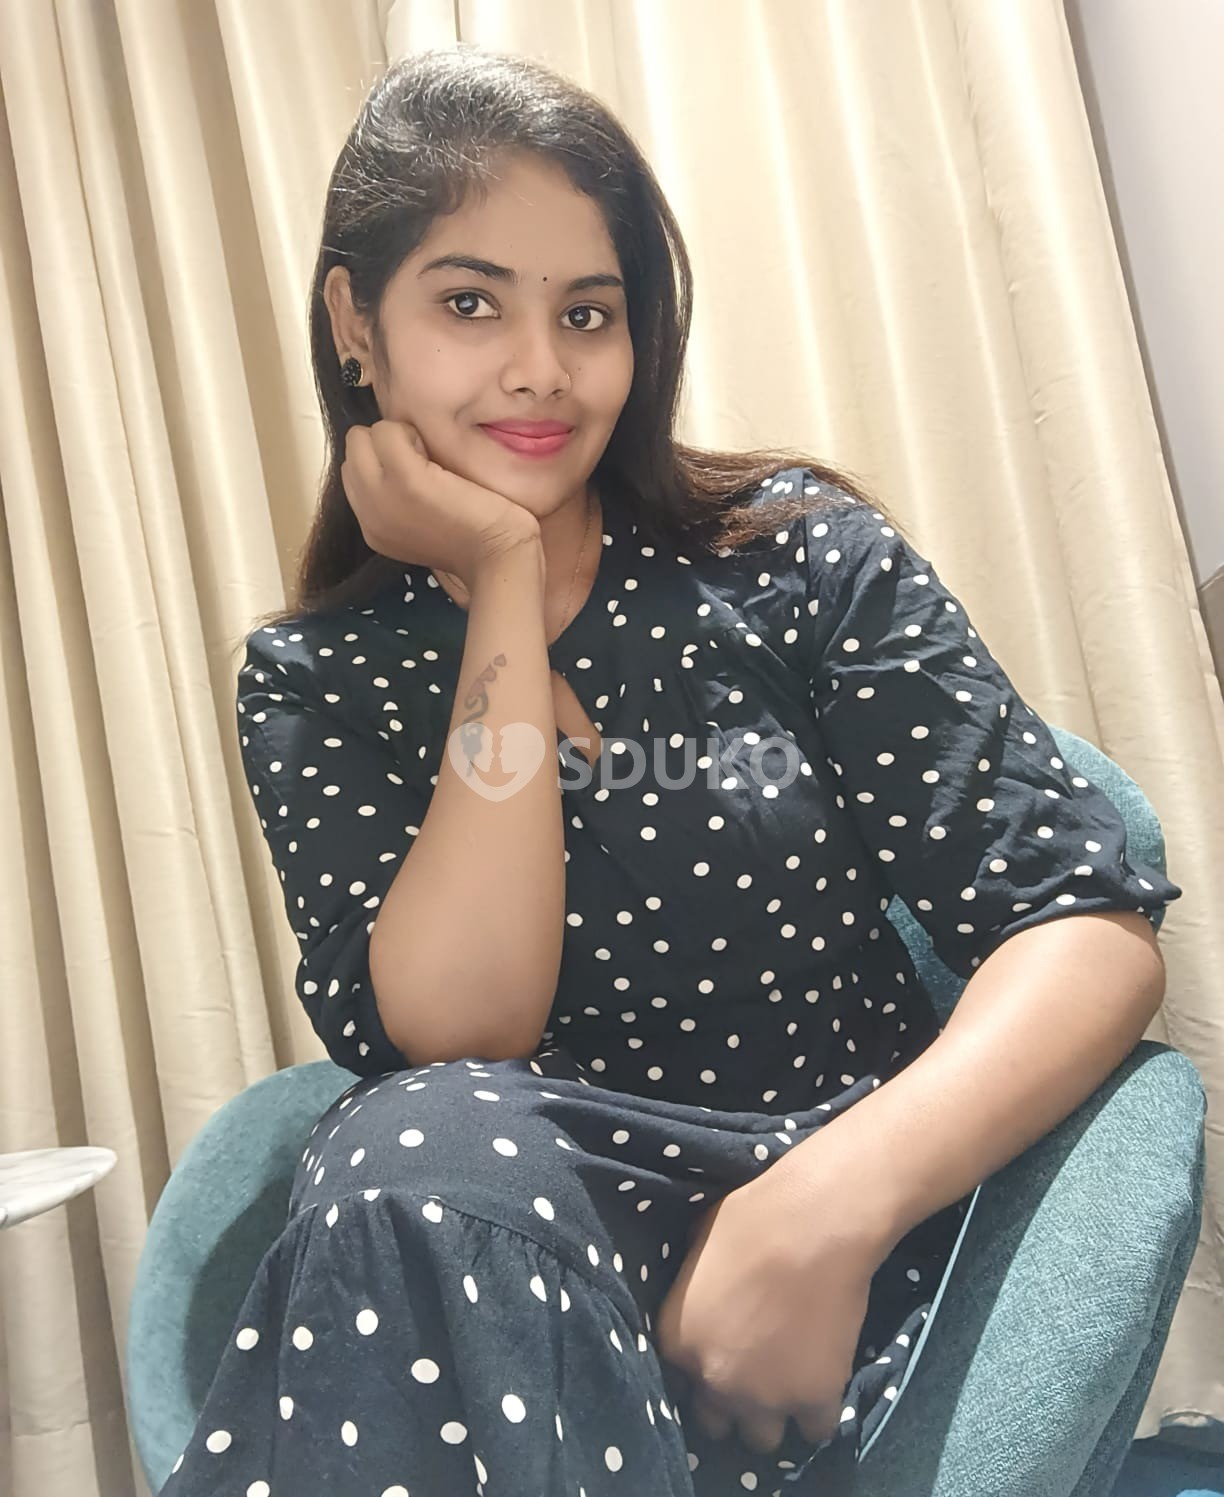 Indira nagar the High demand college girls available for doorstep incall outcall full safe and secure full satisfaction 